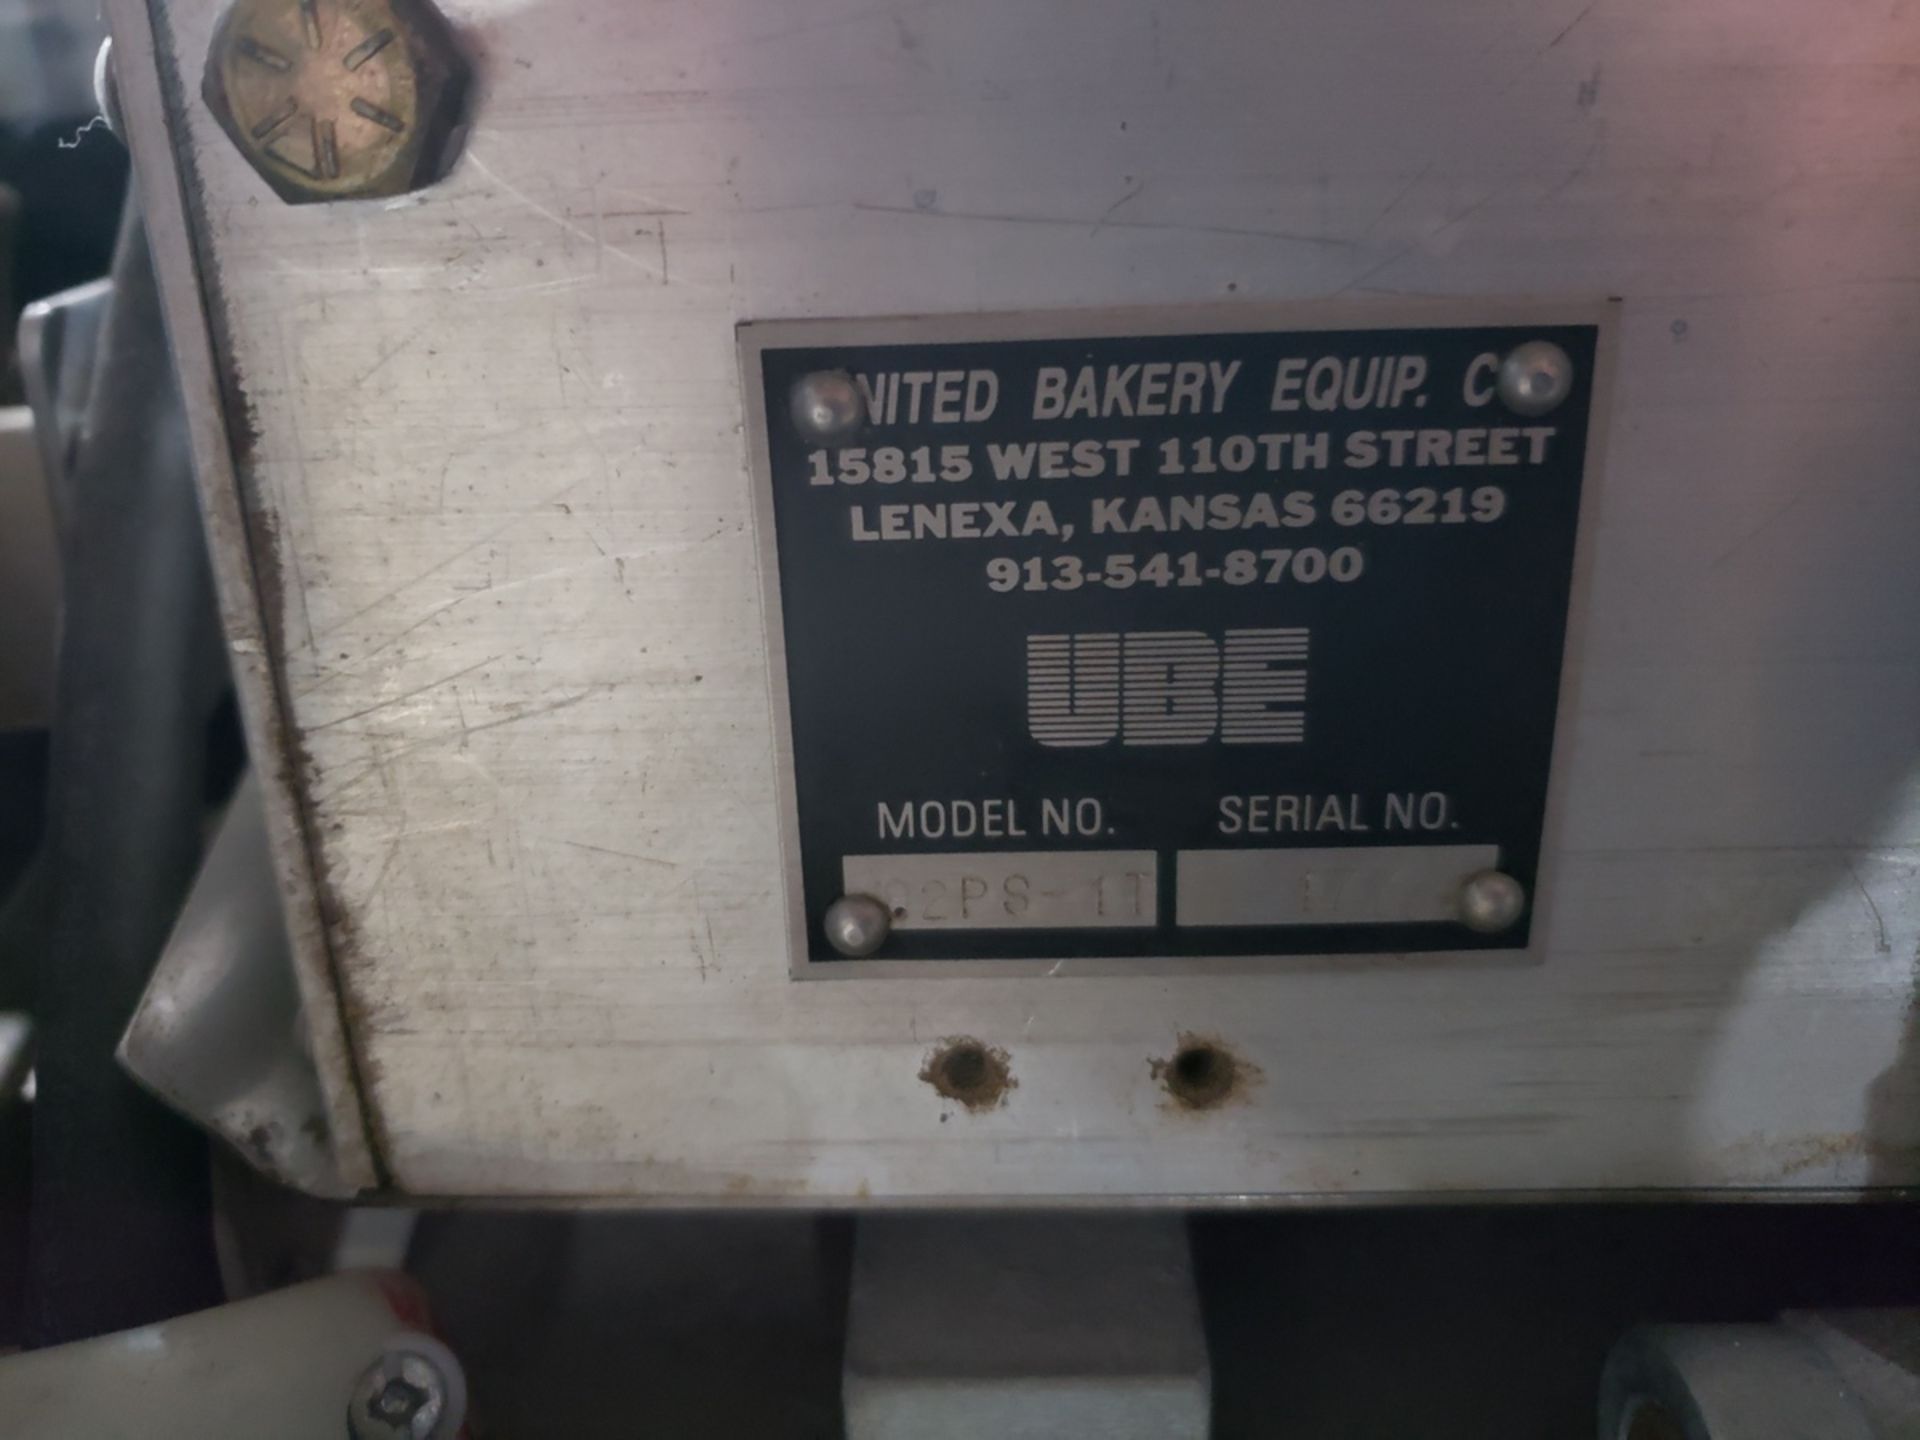 Lot of (2) United Bakery Equip. Bag Sealers, M# 92PS-1T, S/N 177, M# 92PS-1S, S/N 2 | Rig Fee $100 - Image 2 of 3